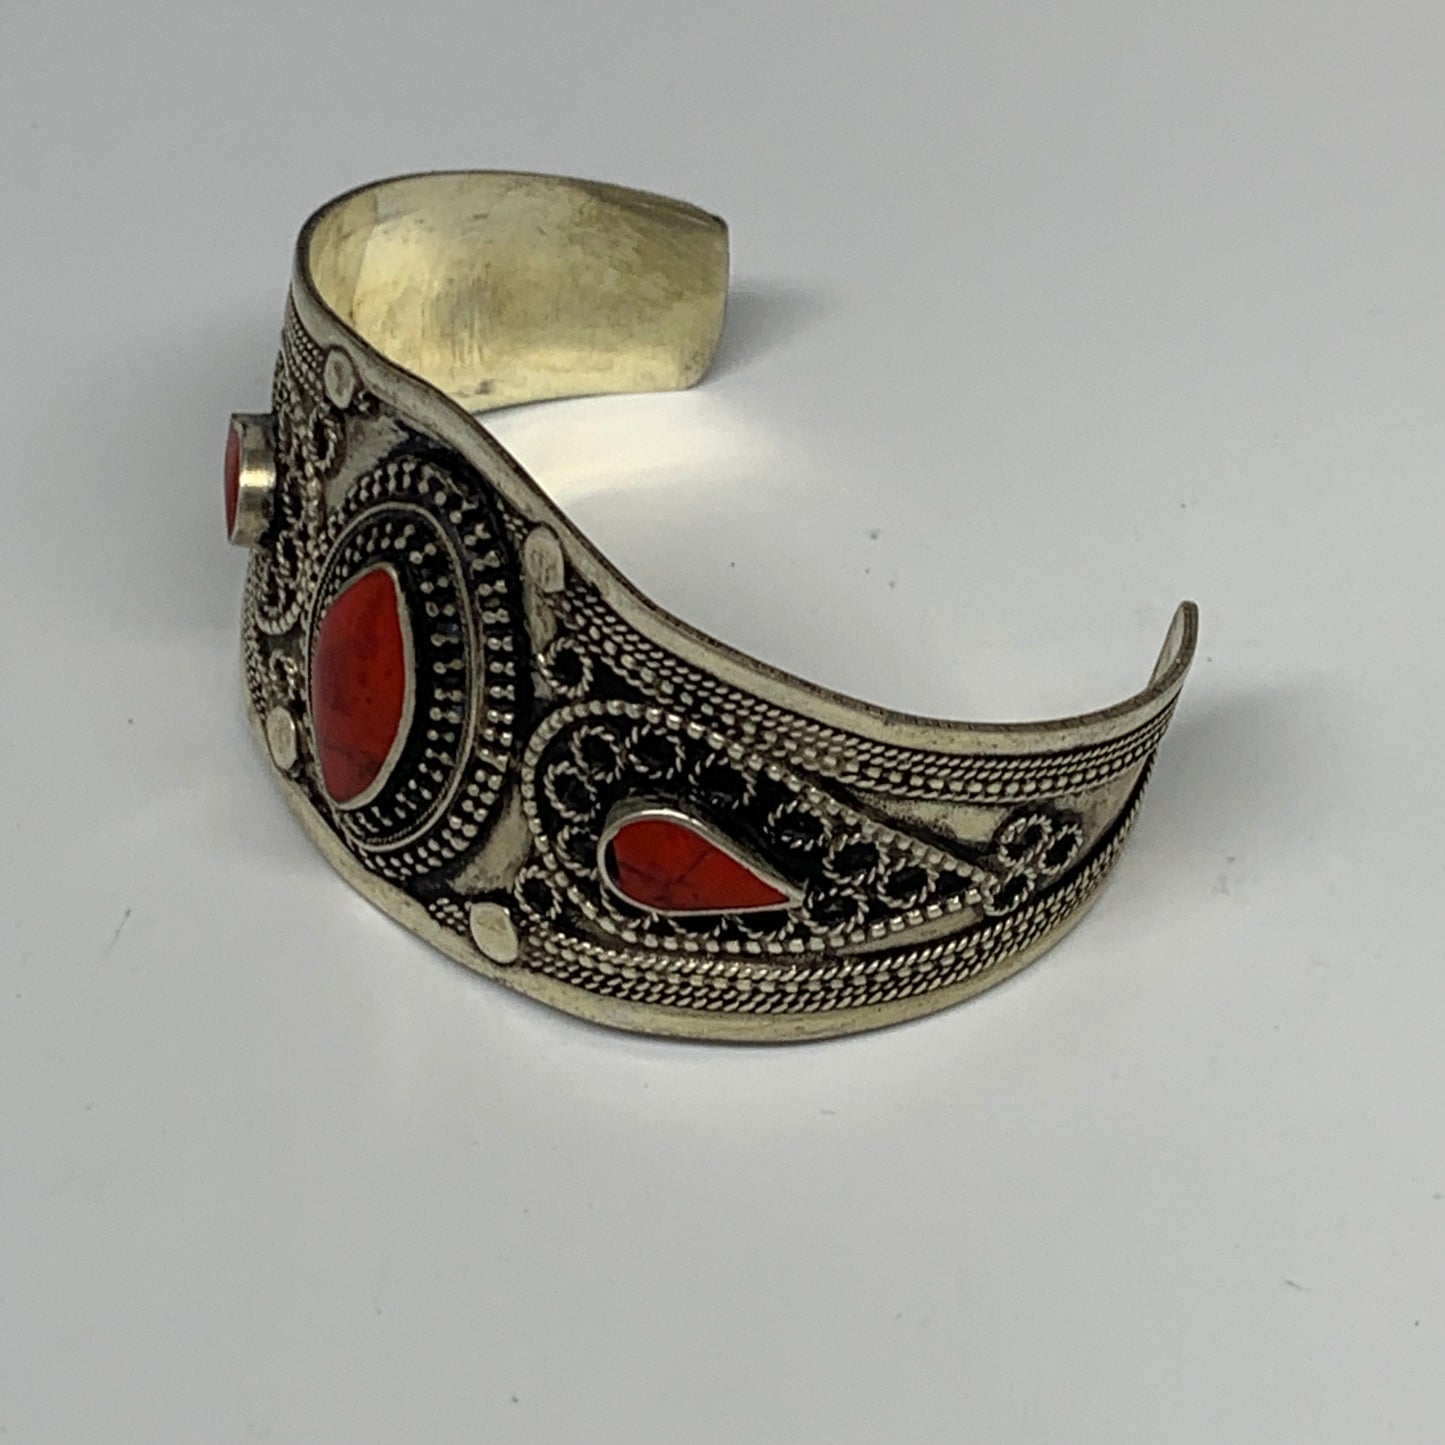 34.2g, 1.6" Turkmen Cuff Bracelet Tribal Small Marquise, Red Coral Inlay, B13501